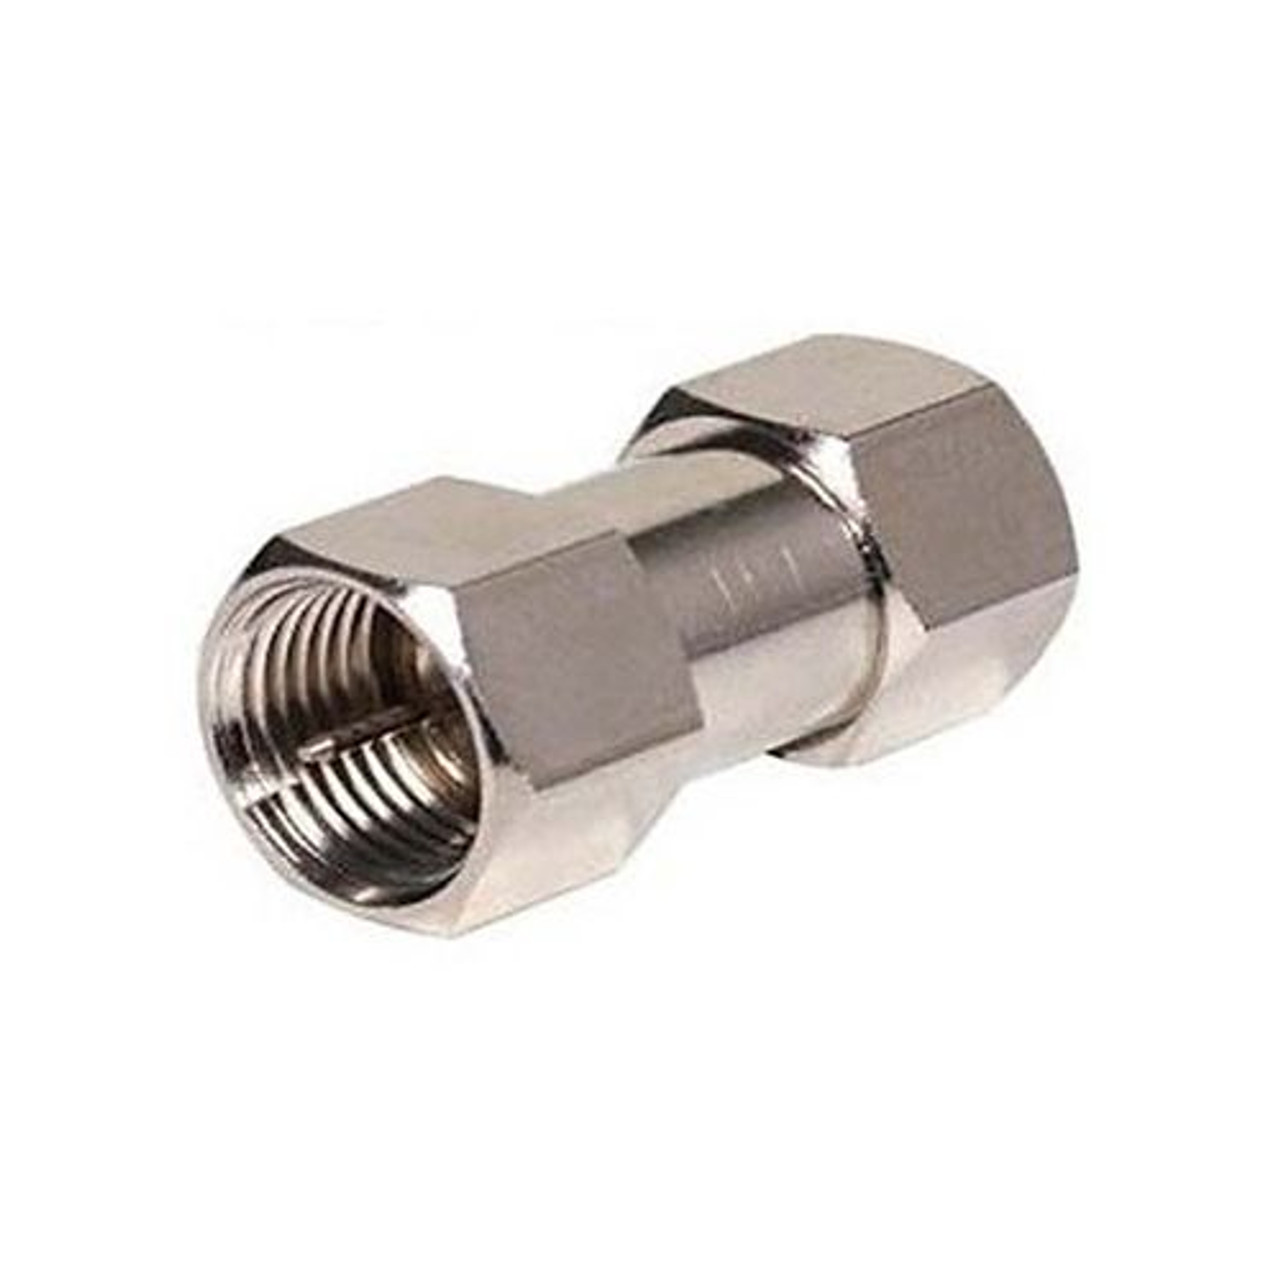 Steren 200-100-25 F Coupler Male to Male Adapter Connector Nickel Plate 25 Pack Double Male Splice F-71 Coaxial Cable Coupling Barrel Connector, RF Signal Audio Video Component Plug, Part # 200100-25